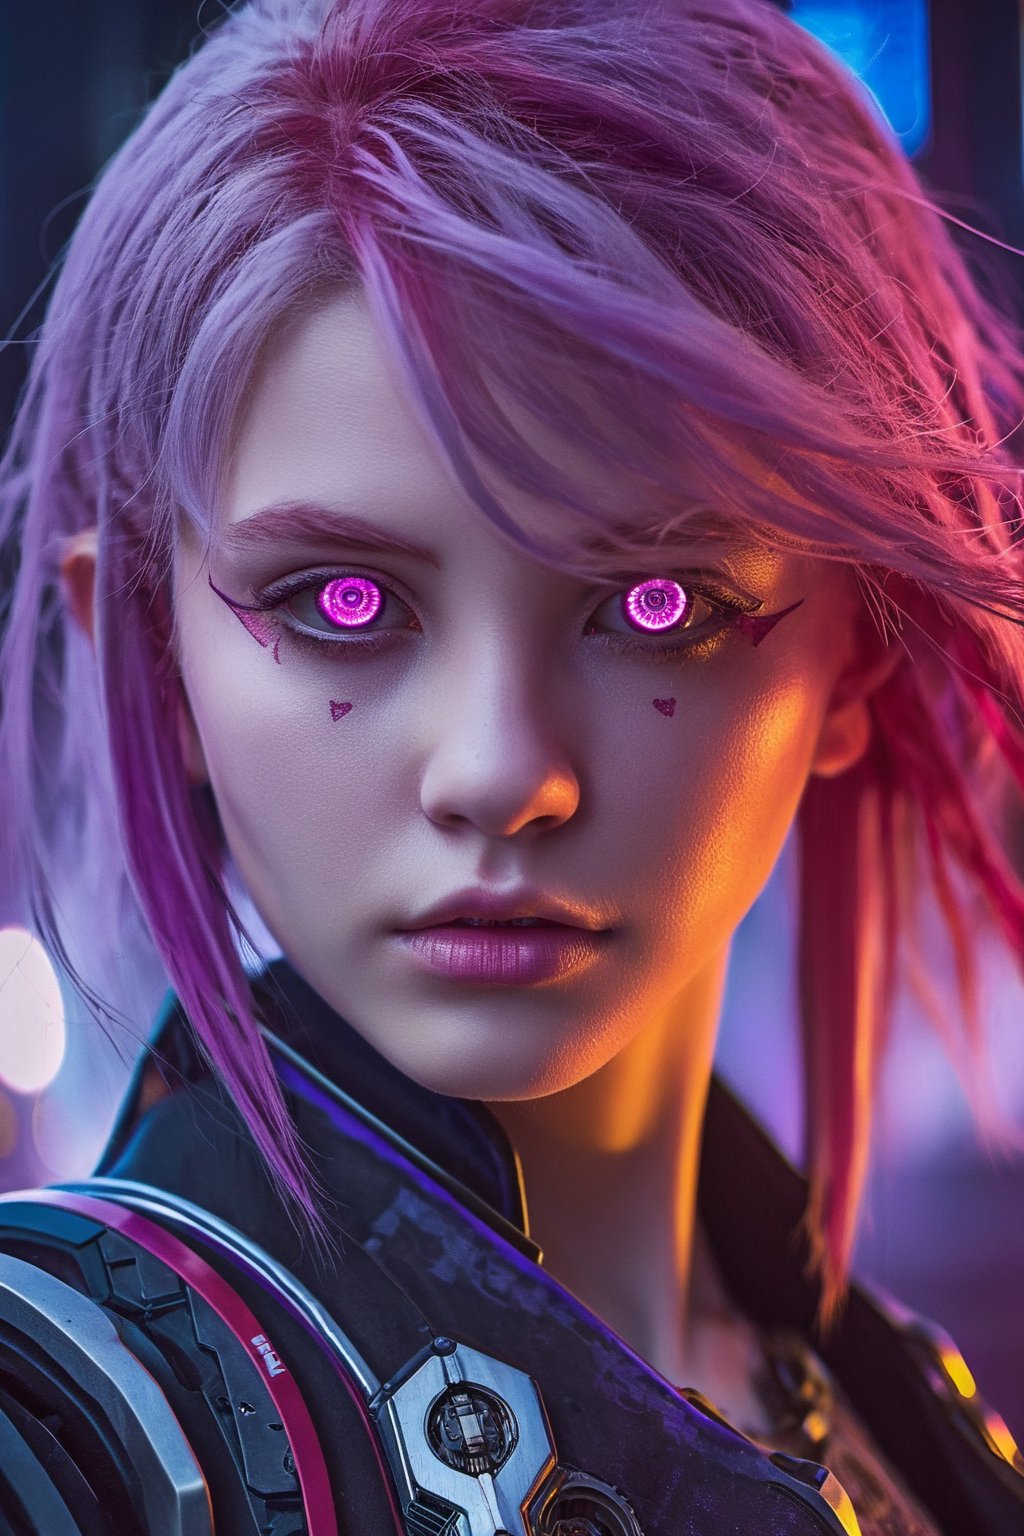 masterpiece, best quality, illustration, beautiful detailed eyes,colorful background,mechanical prosthesis,mecha coverage,emerging dark purple across with white hair,pig tails,disheveled hair,fluorescent purple,cool movement,rose red eyes,beatiful detailed cyberpunk city,multicolored hair,beautiful detailed glow,1 girl, expressionless,cold expression,insanity, long bangs,long hair, lace,dynamic composition, motion, ultra - detailed, incredibly detailed, a lot of details, amazing fine details and brush strokes, smooth, hd semirealistic anime cg concept art digital painting